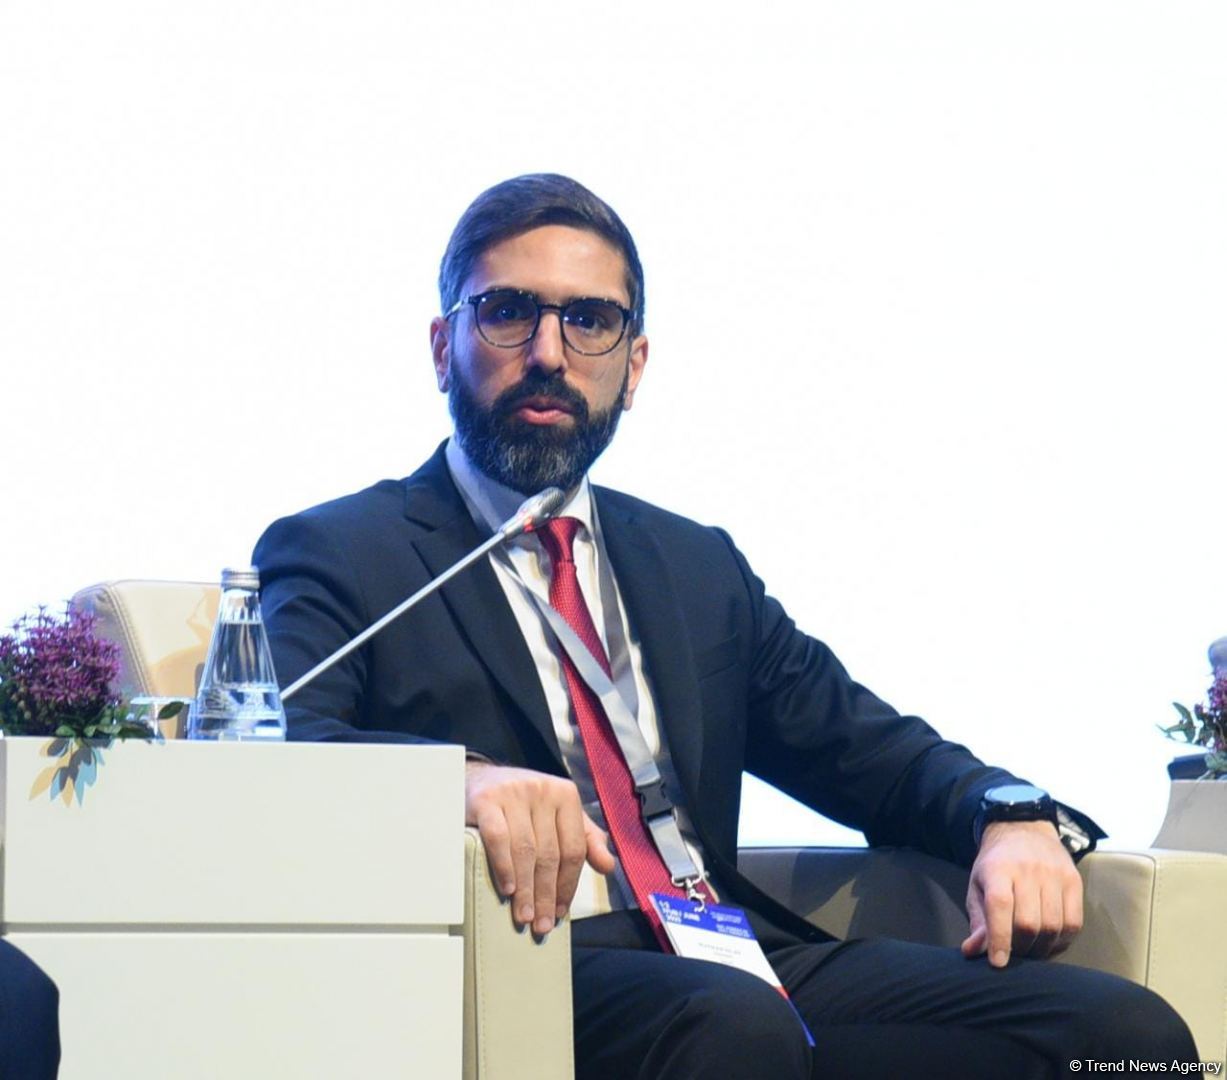 Azerbaijan's SOCAR boosts investments in oil, gas production - company president (PHOTO)